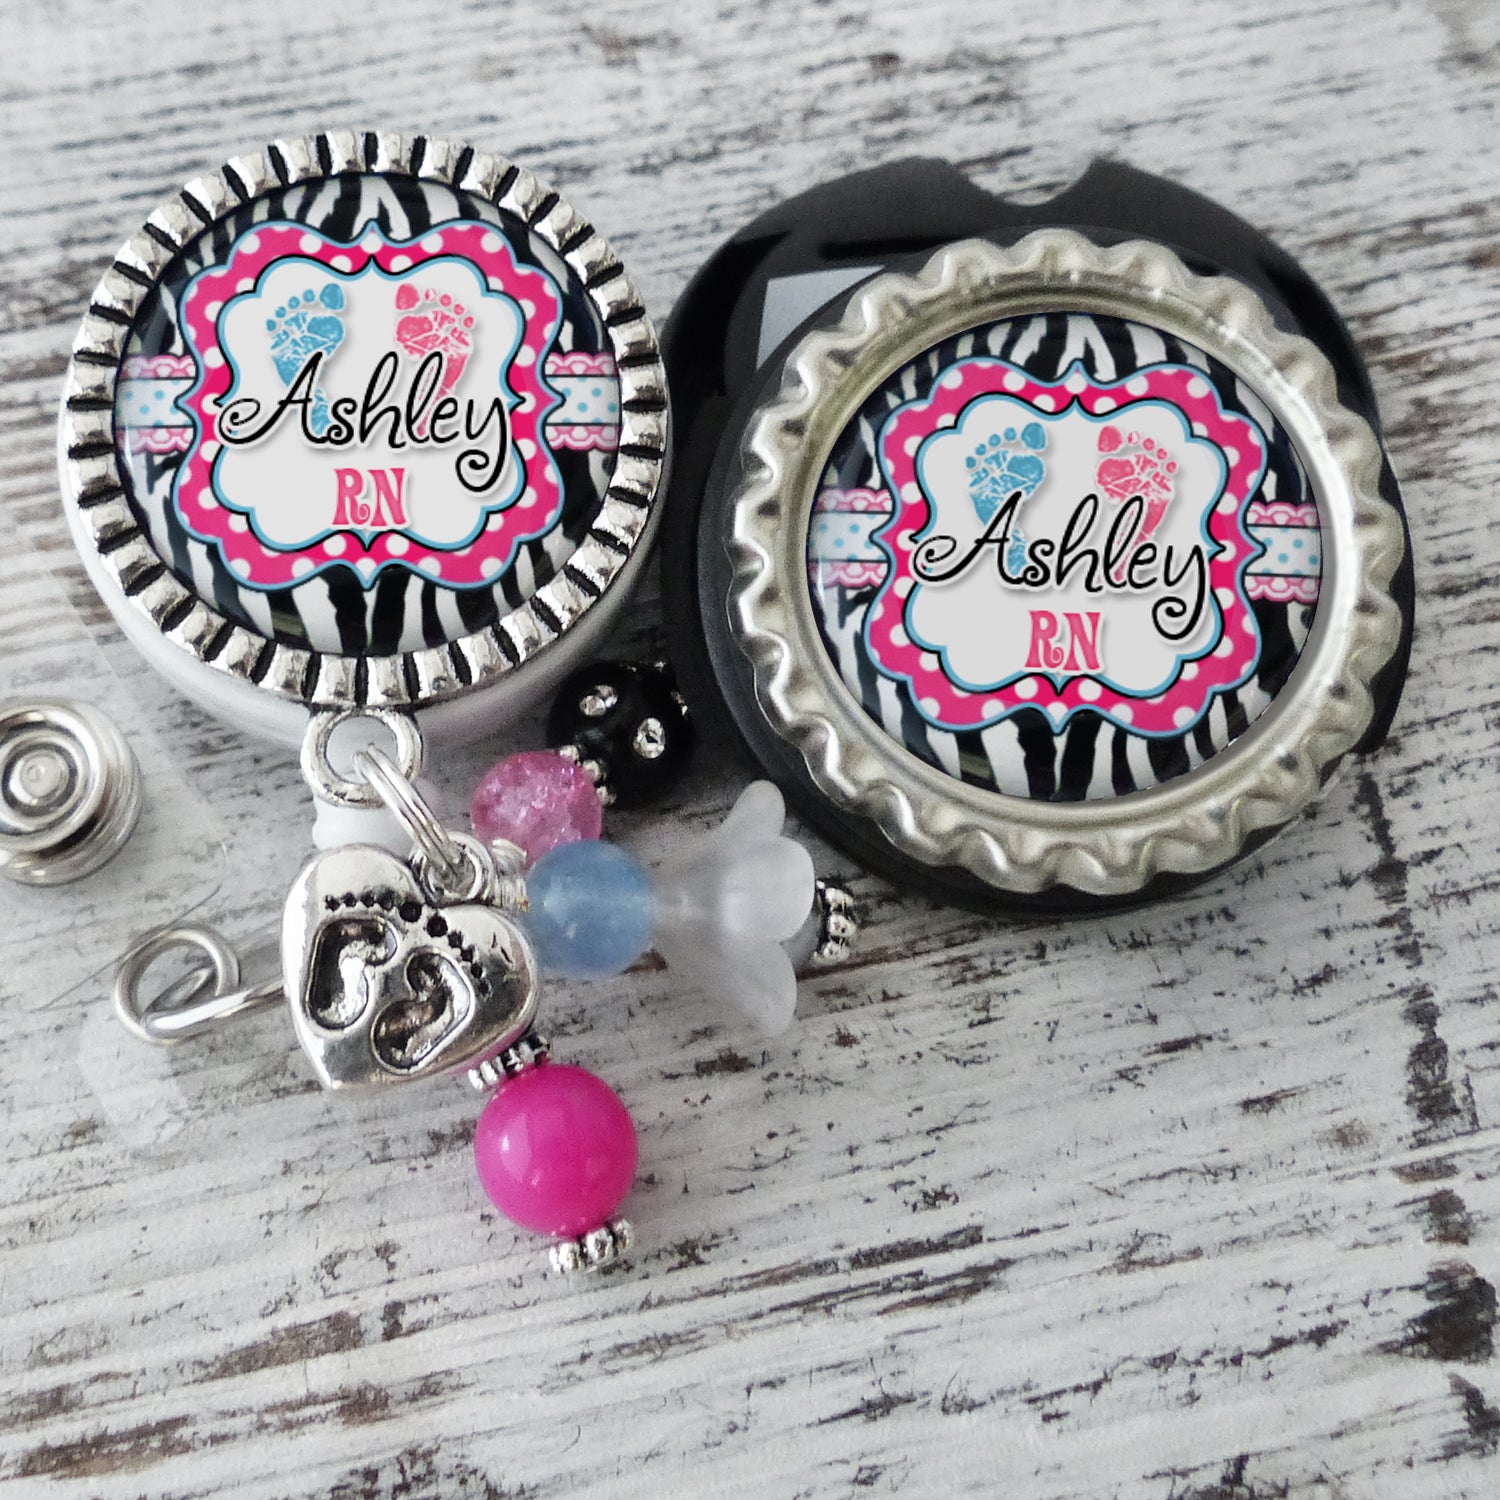 Personalized L&D Badge Holder with matching Stethoscope Name Tag Set-L&D-NICU-Baby Footprints-Zebra Print, Retractable Badge Reel for Nurses-RN Gifts